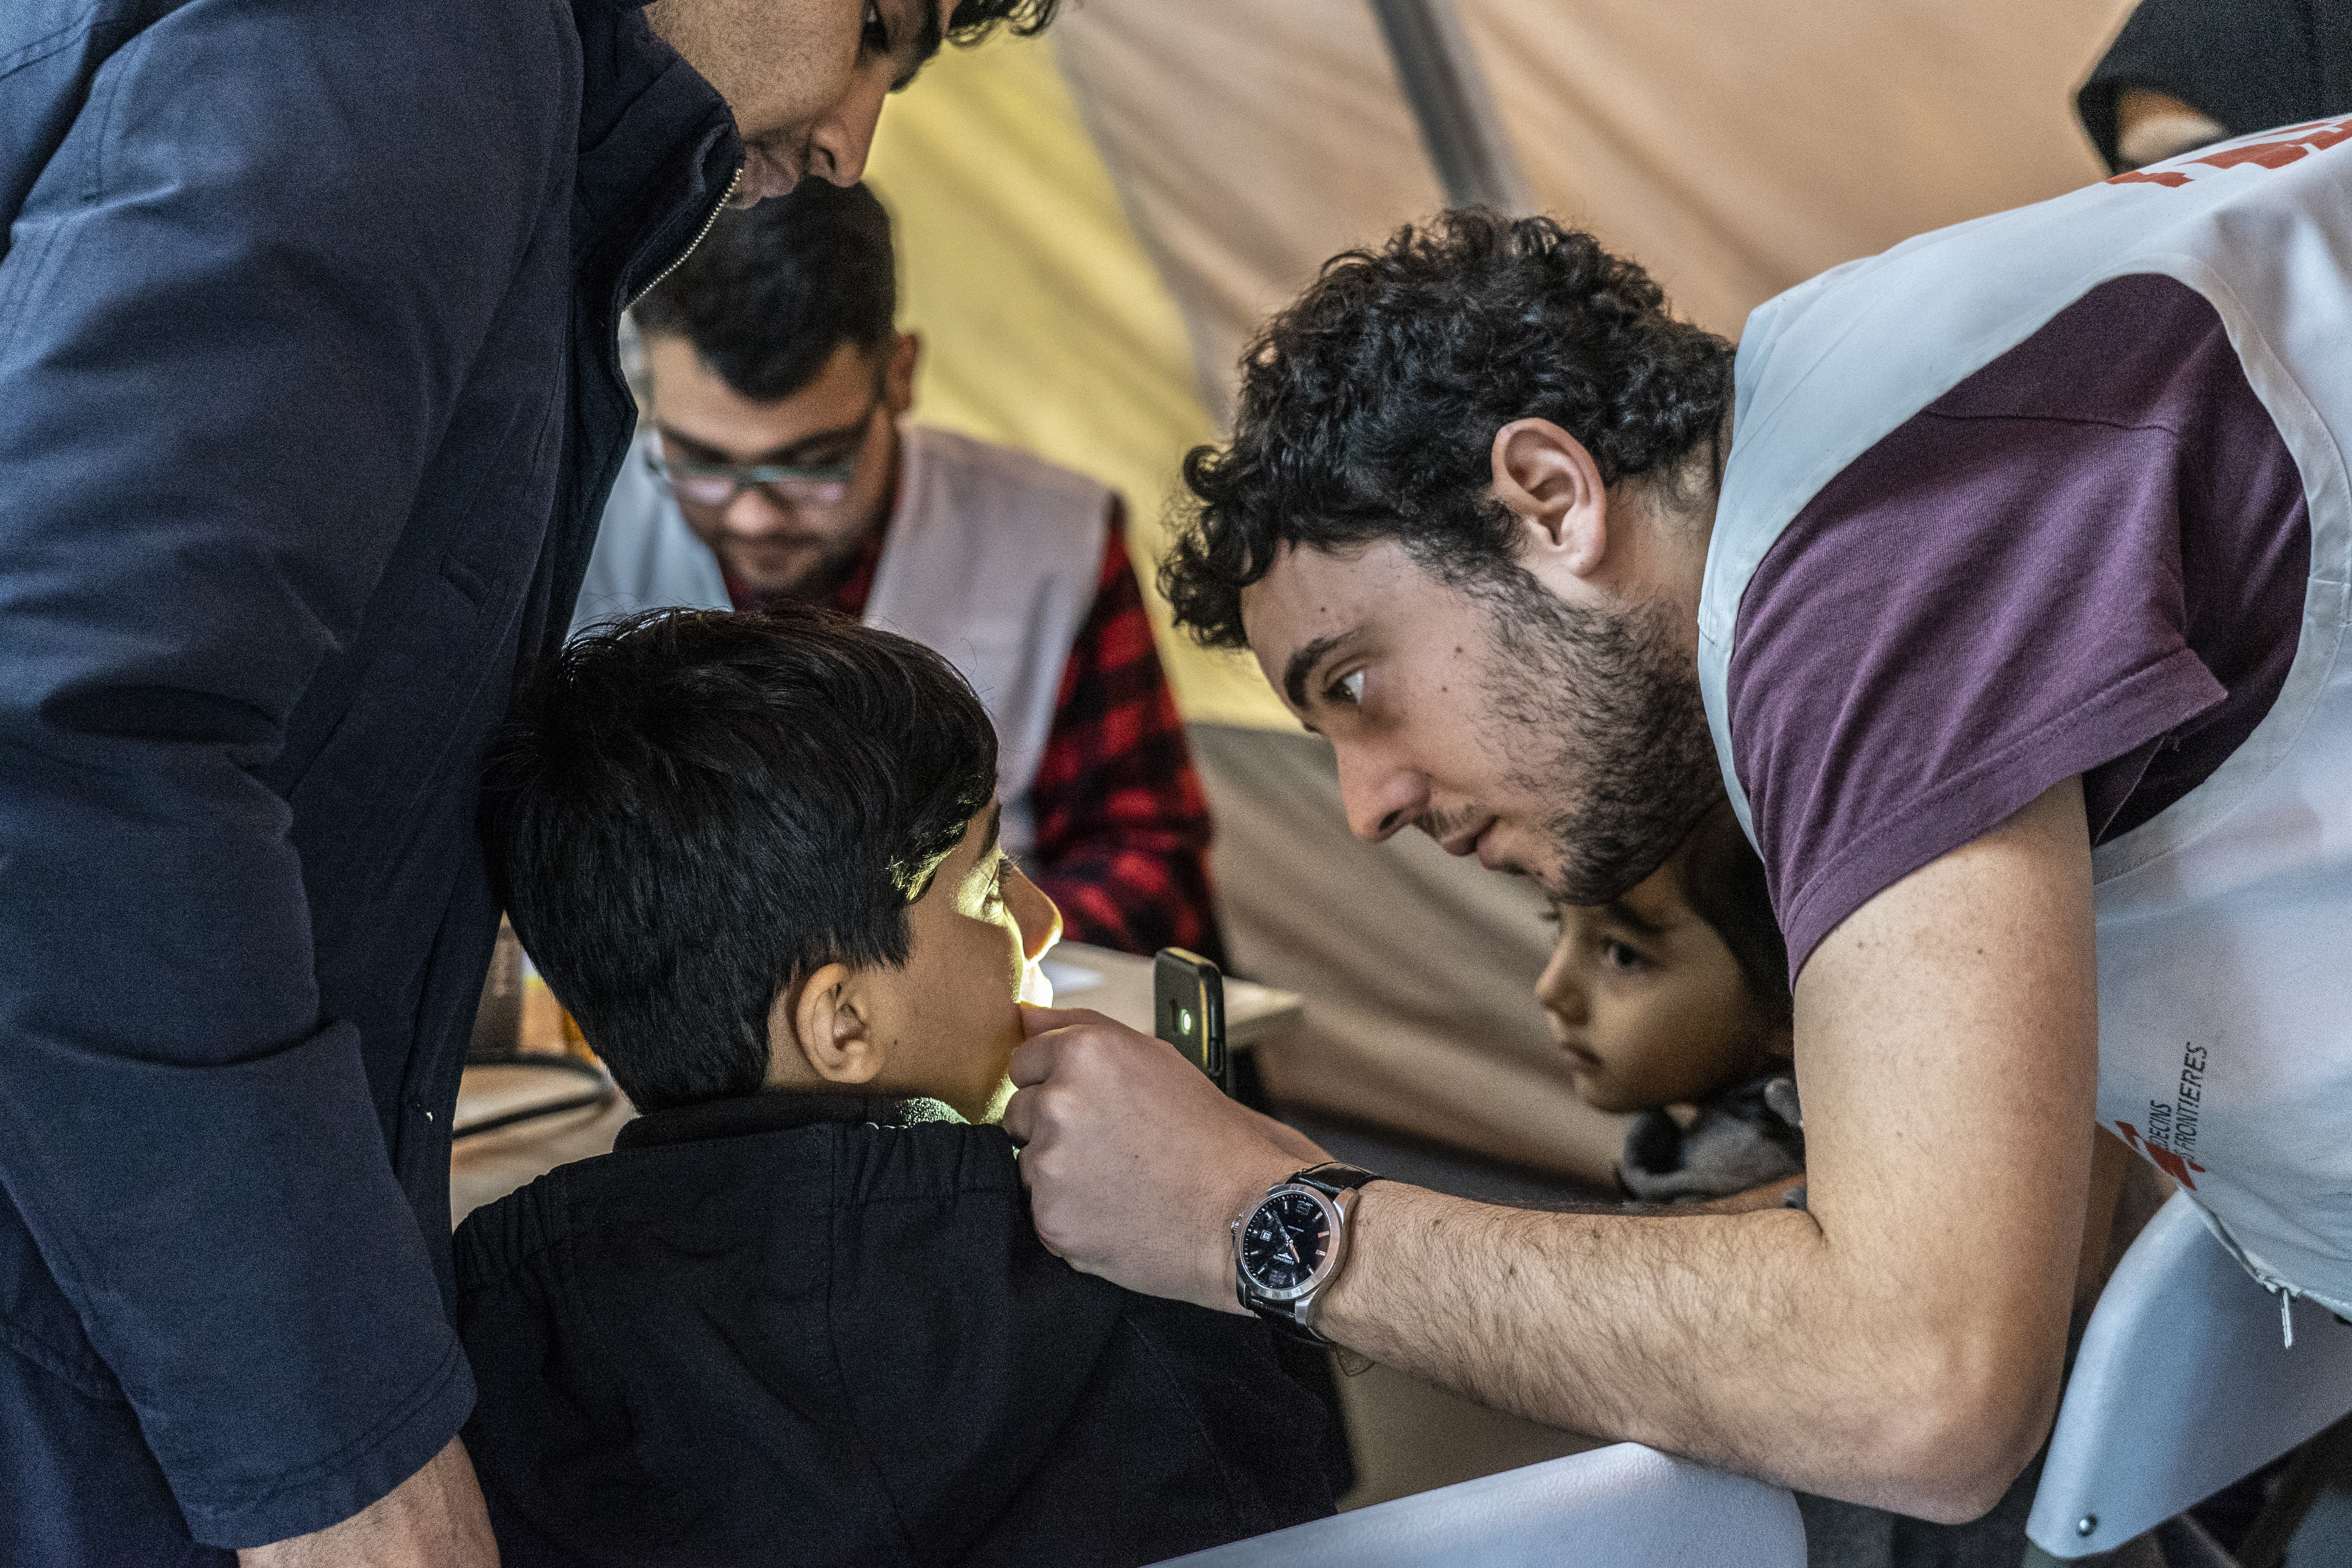 MSF doctor Leonidas Alexakis examines a child in the MSF pediatric clinic outside Moria camp on Lesbos island in Greece. MSF medical staff see around 80-100 children per day with illnesses directly related to living in such awful conditions.